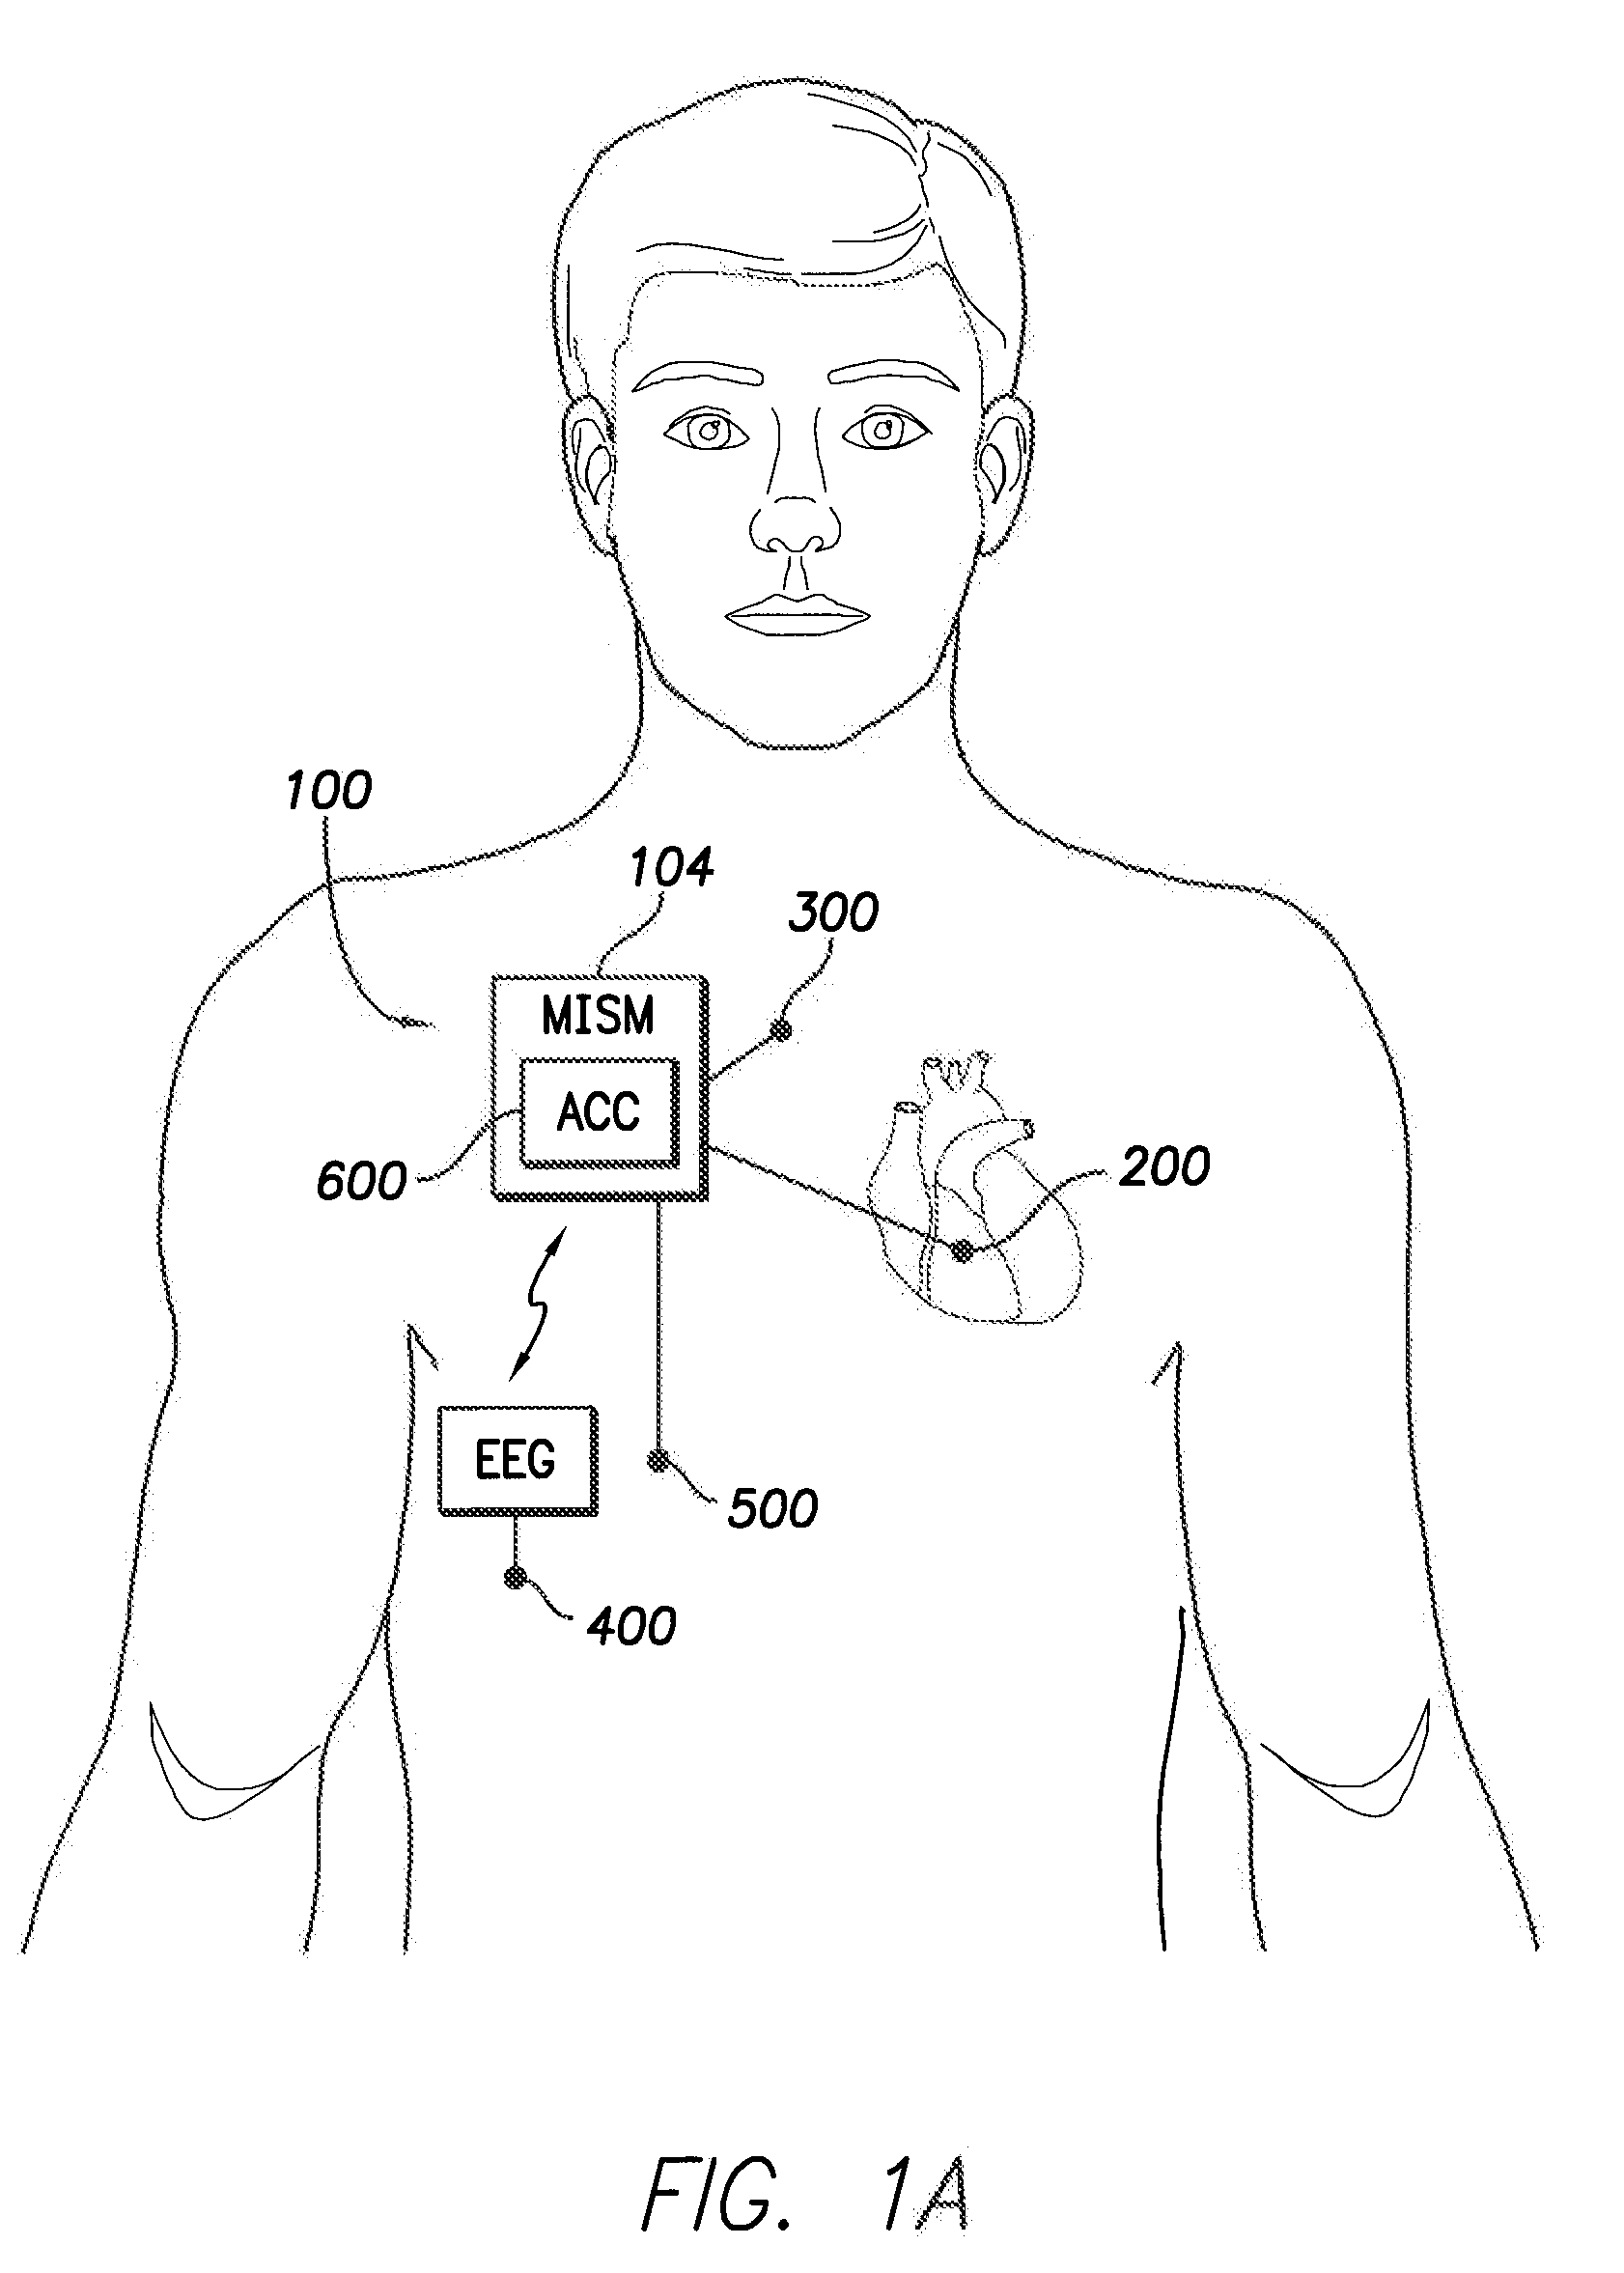 Multifaceted implantable syncope monitor - mism